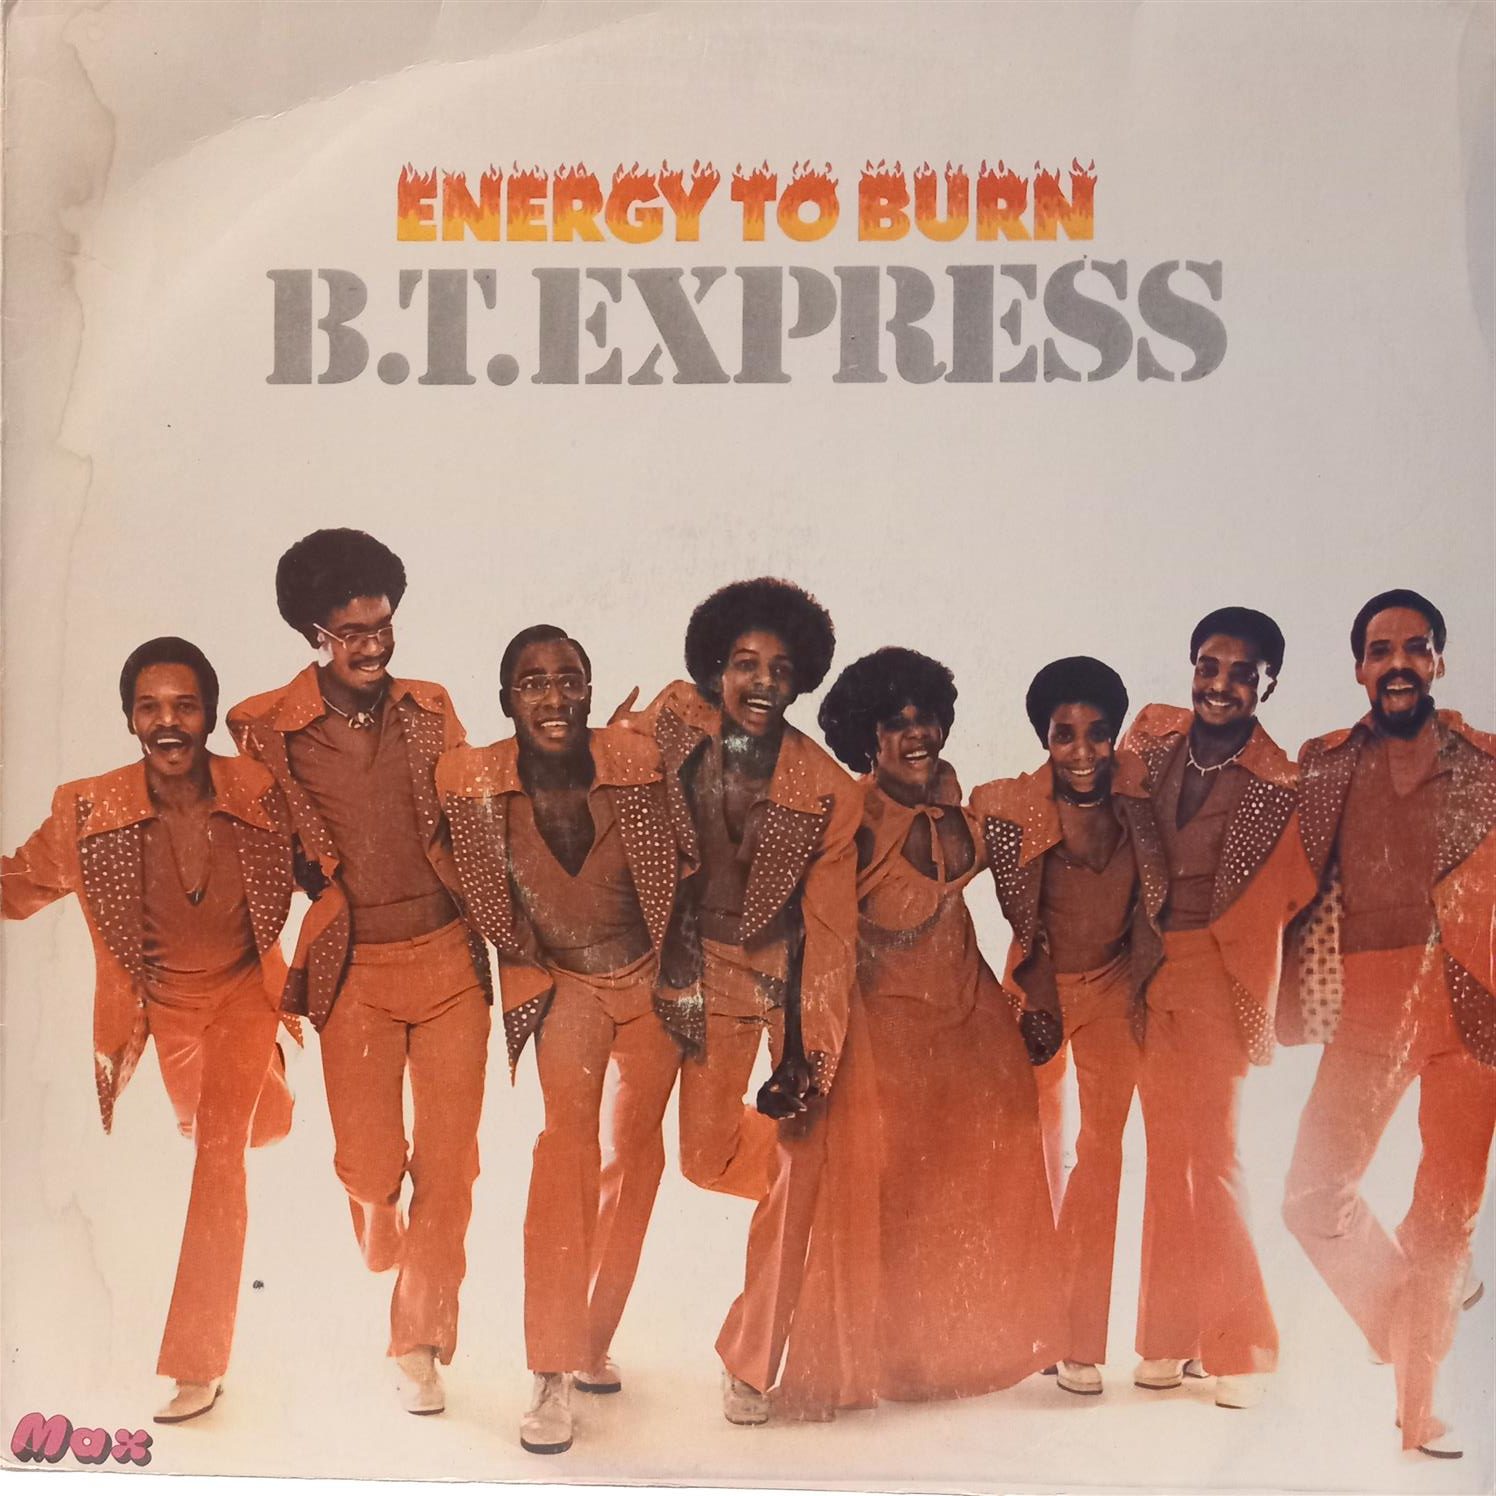 B.T. EXPRESS – ENERGY TO BURN ON